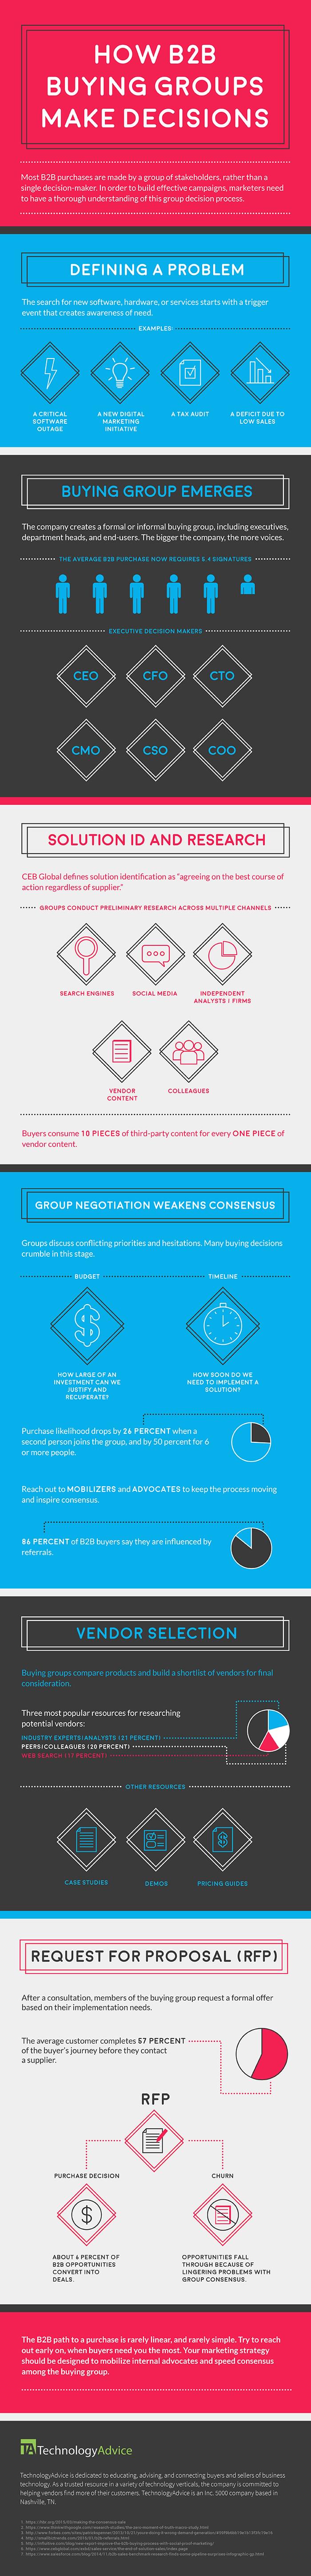 How B2B Buying Groups Make Decisions